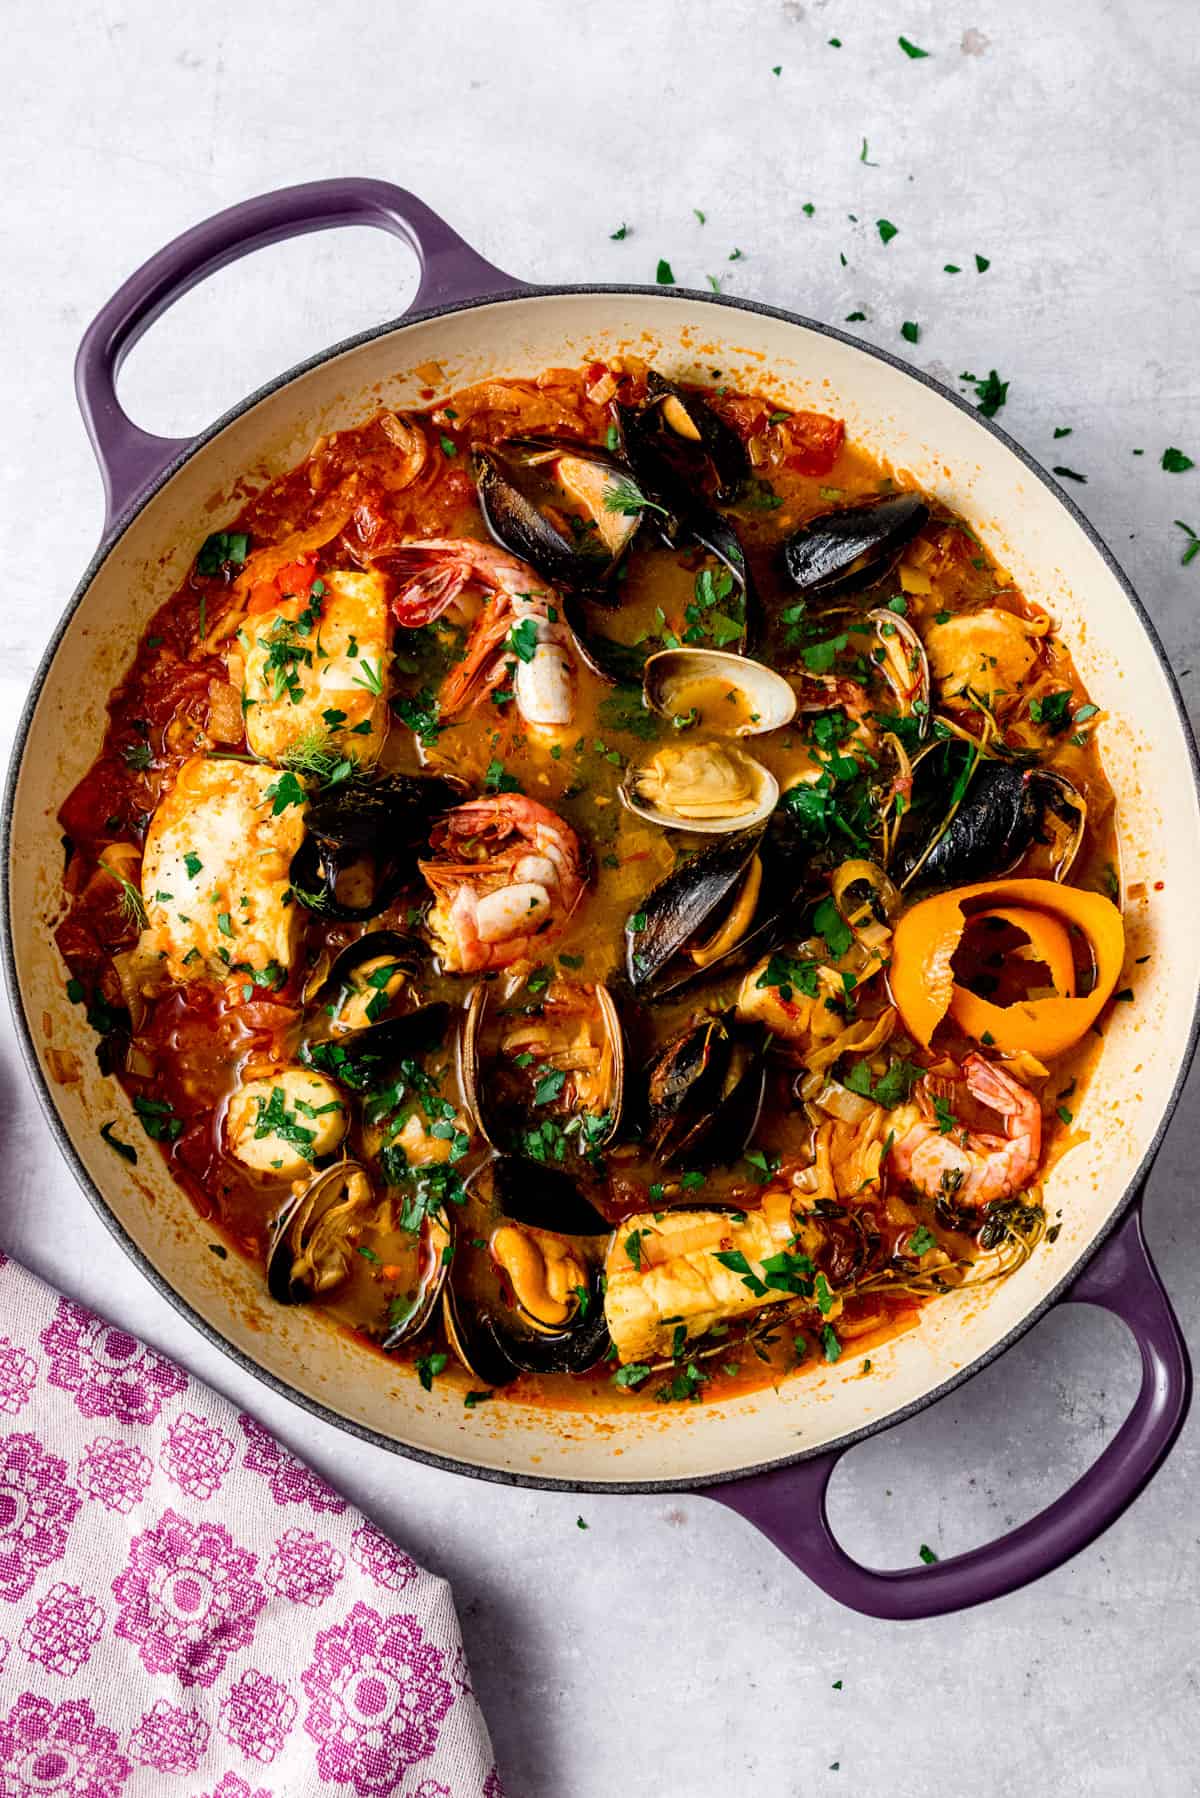 Easy bouillabaisse recipe, French seafood stew with mussels, clams and halibut.